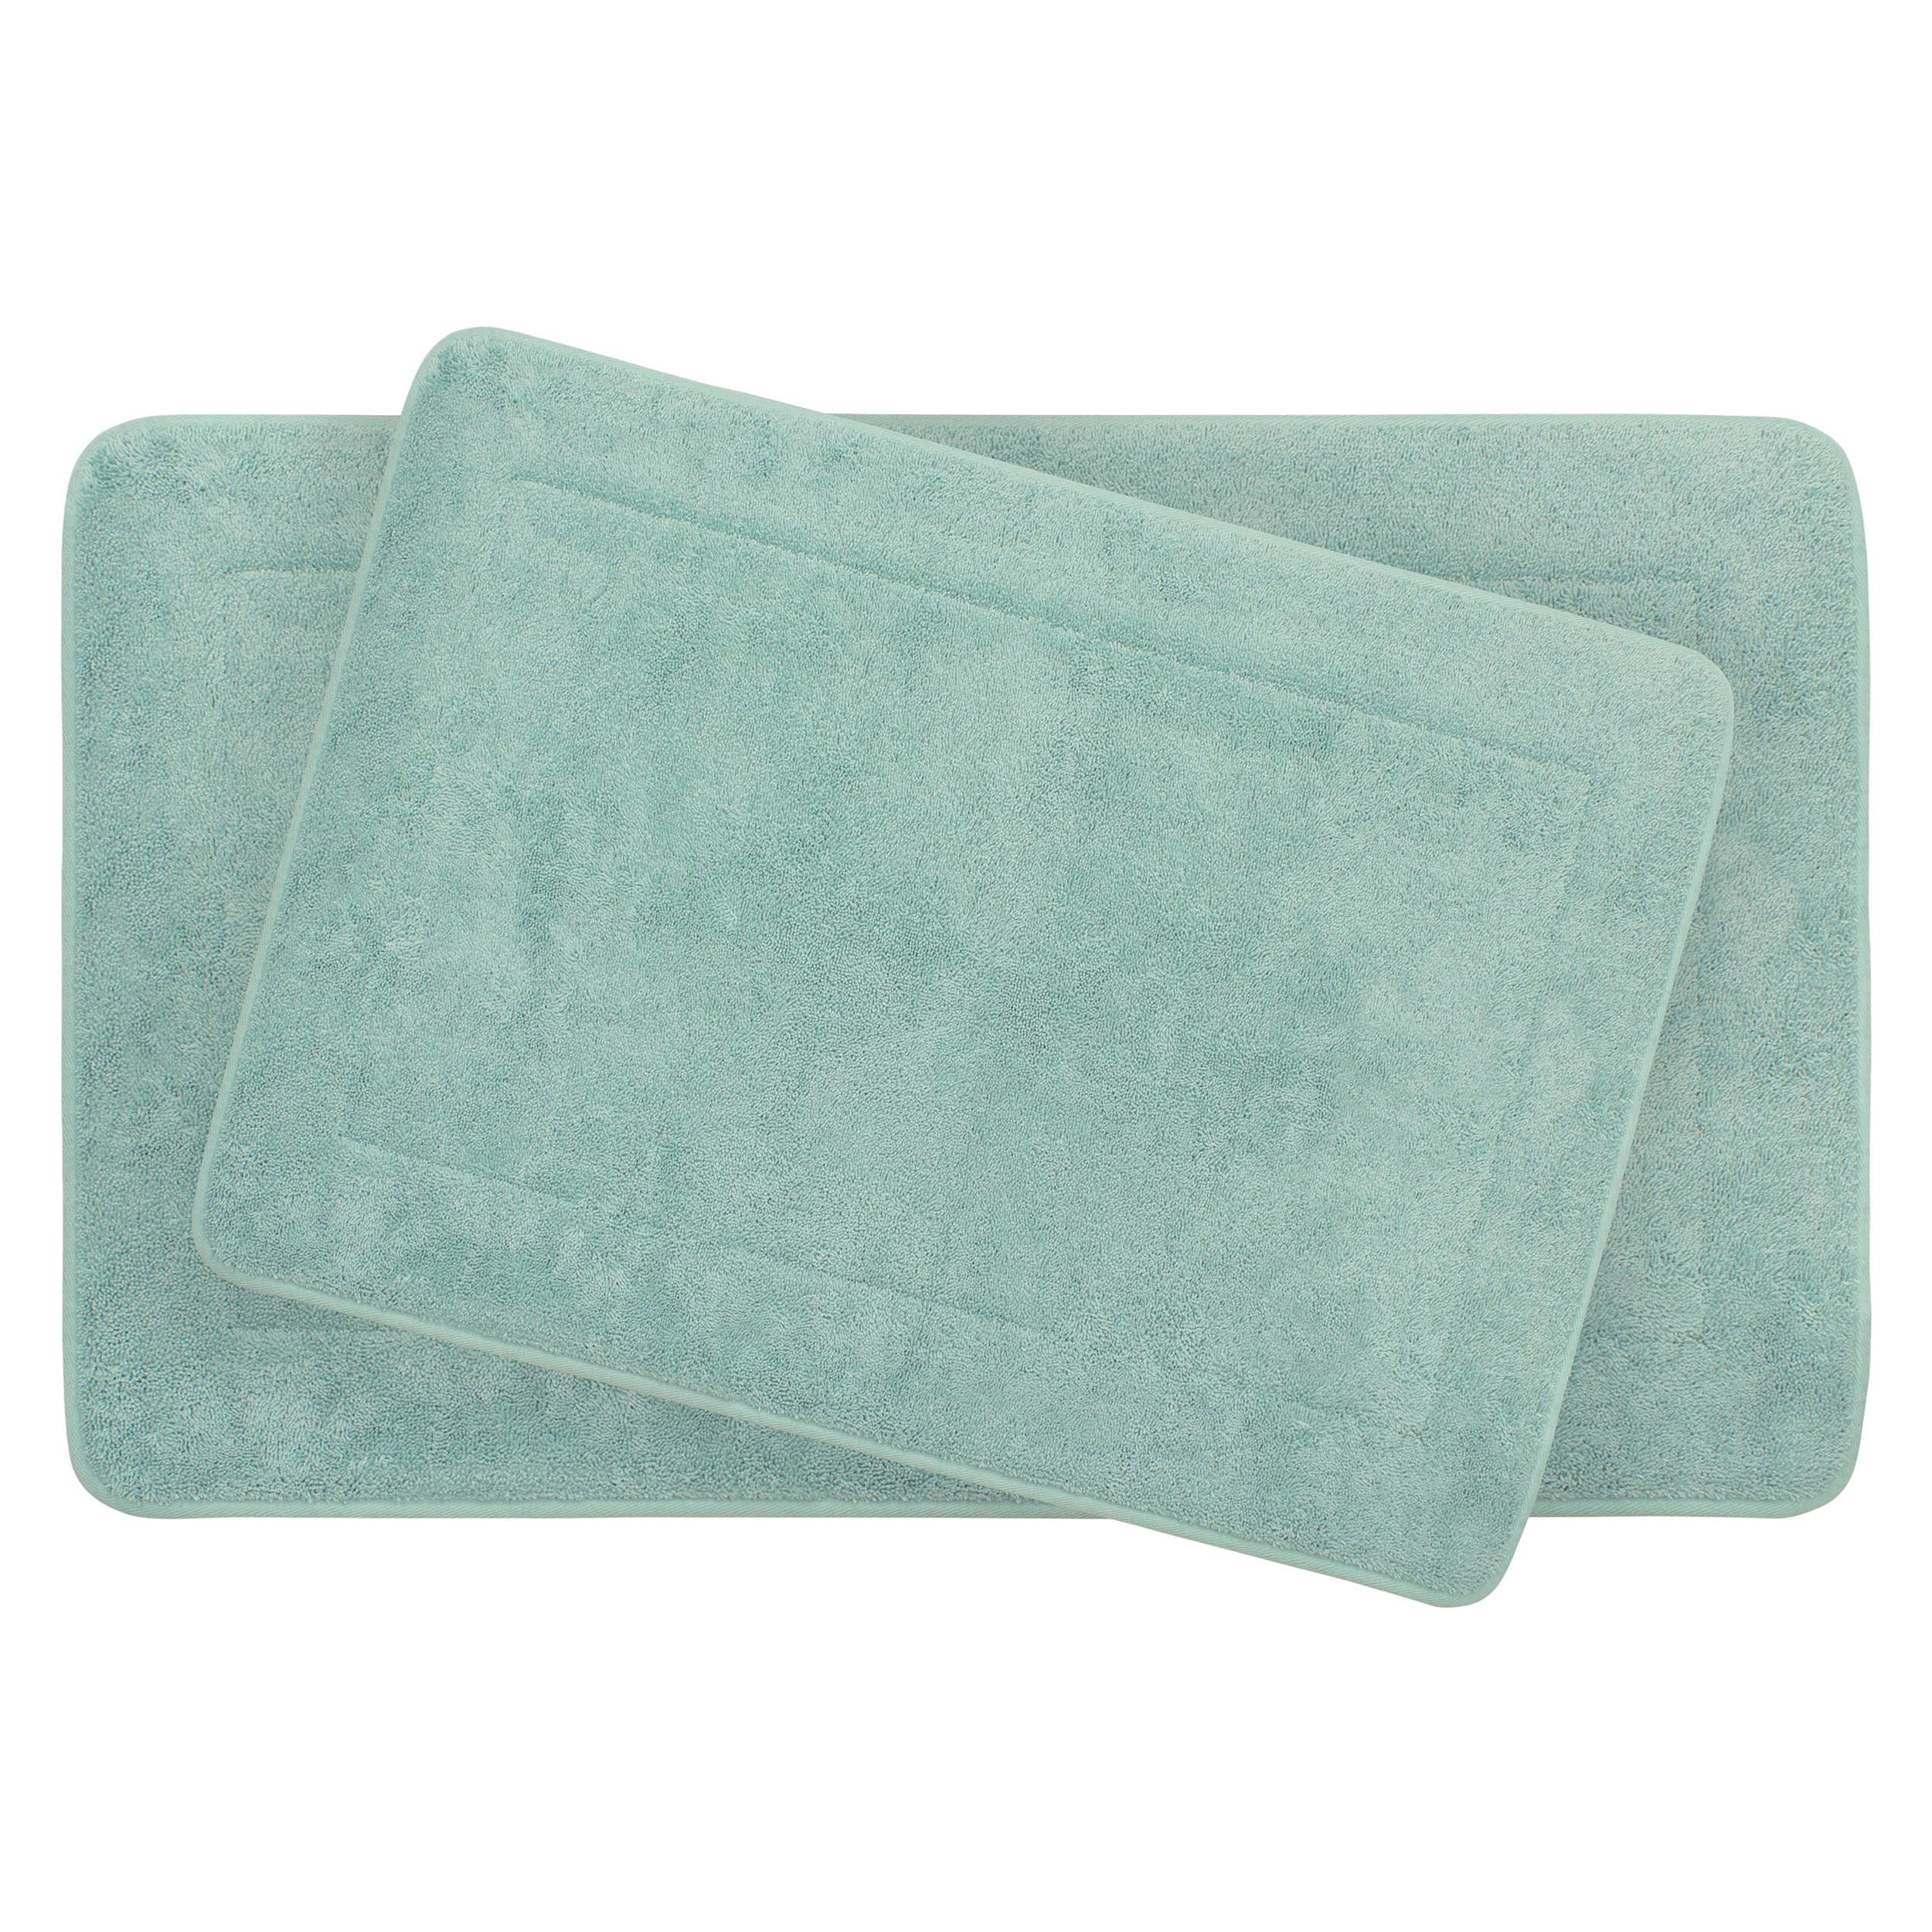 https://ak1.ostkcdn.com/images/products/is/images/direct/256bab7d7873b9813105ad6322db13936b7f025a/Oliver-Brown-Terry-Memory-Foam-Bath-Mat.jpg